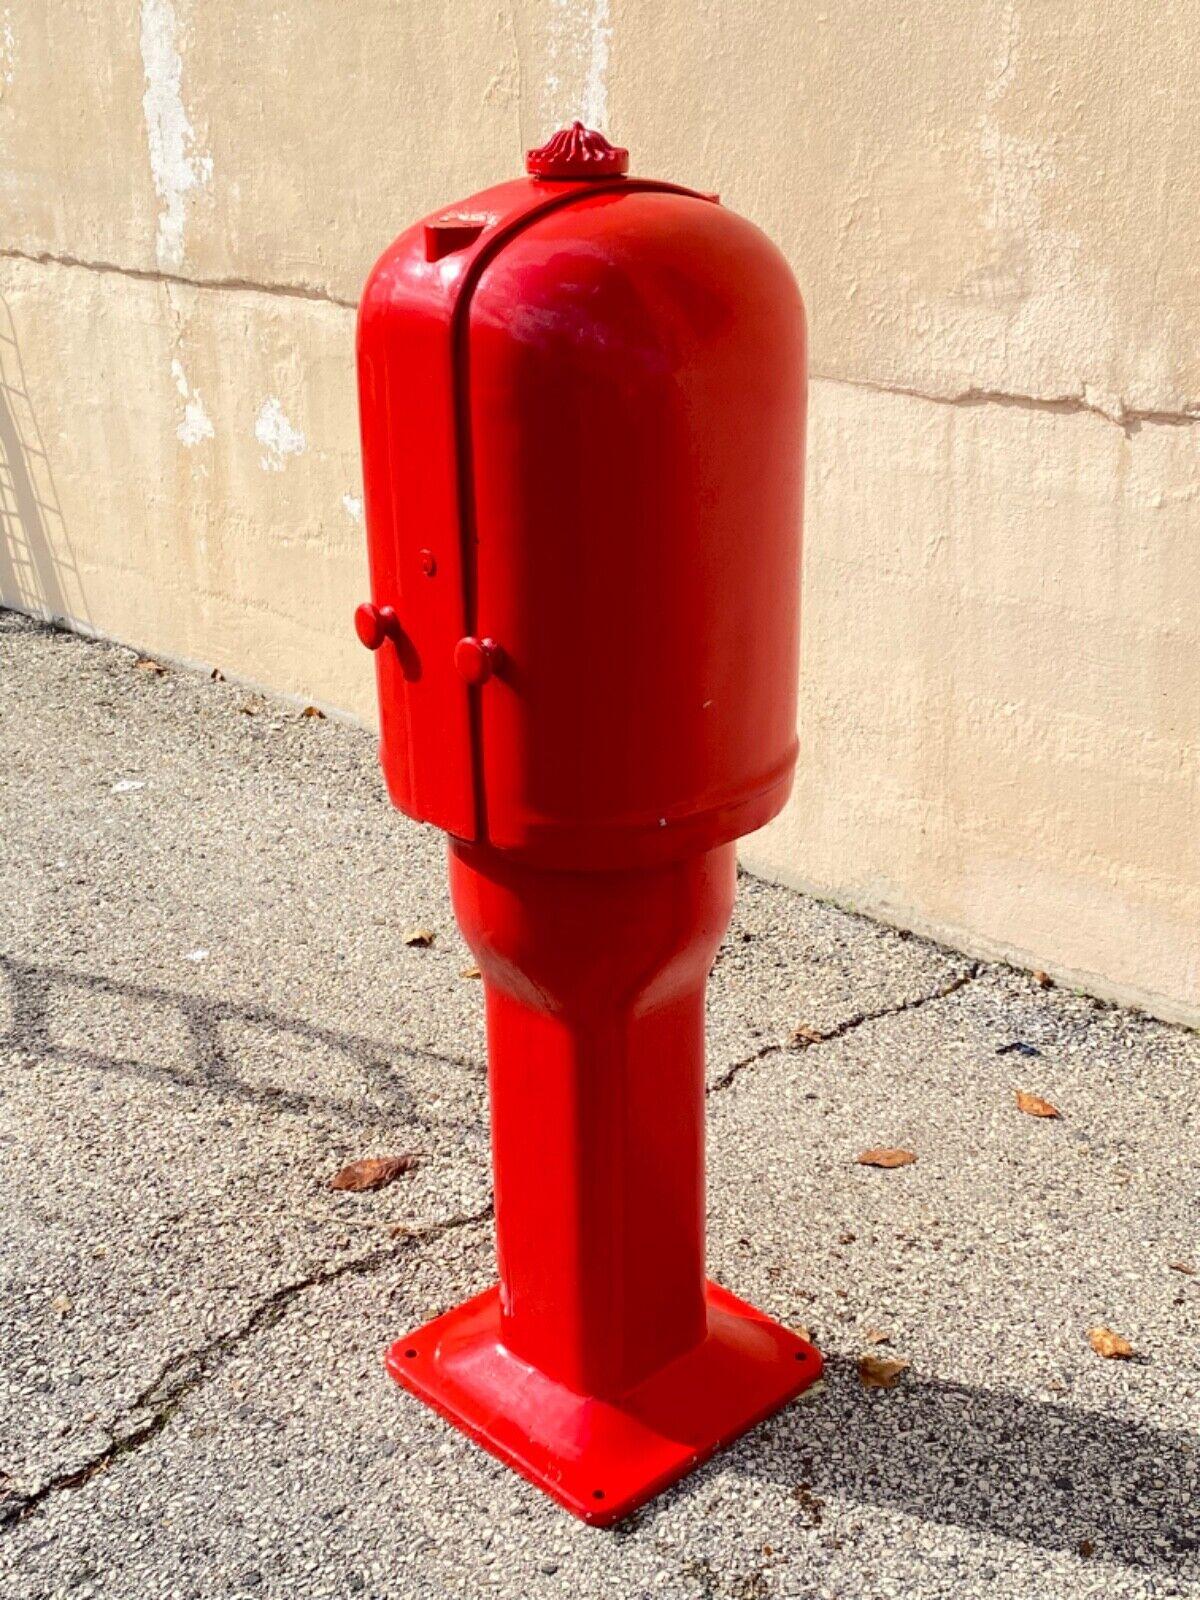 Antique Gilbert & Barker Red Self Measuring Type 208 Vintage Curbside Gas Pump. Item featured weighs approx 180 lbs, remarkable red color, original labels, very nice vintage item, does not include key and is currently unlocked. Circa Early to Mid